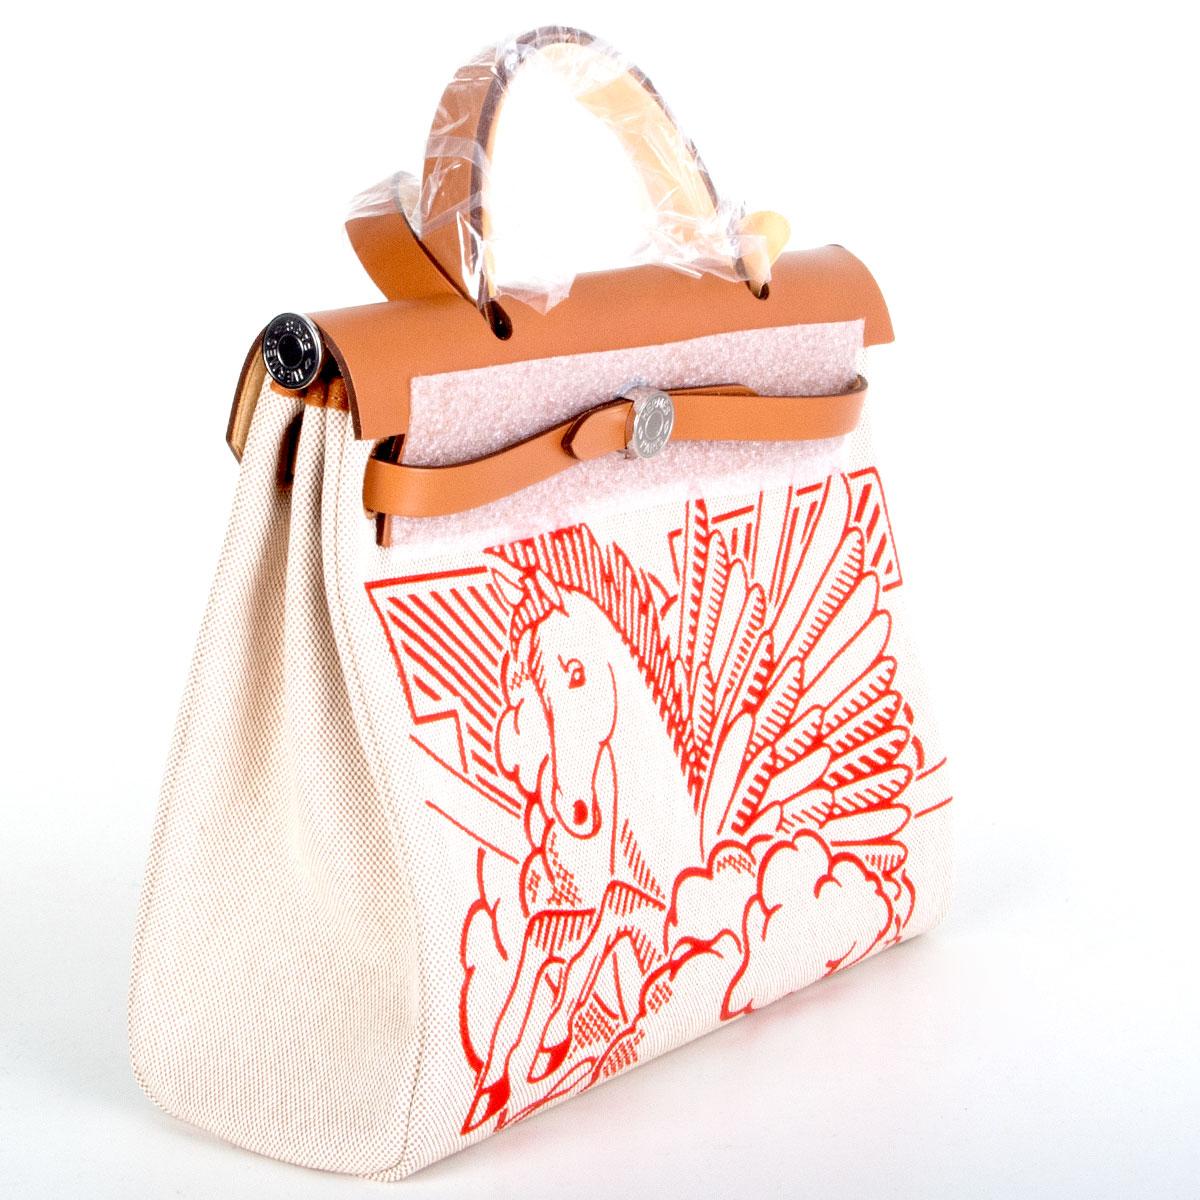 authentic Hermès 'Pegase Pop Herbag Zip 31 Retourne' shoulder bag in Ecru-Beige (oatmeal) Toile H canvas with Capucine red print and details in Nature (tan) Vache Hunter leather. Exterior zip pocket on the back. Closes with two straps on the front.